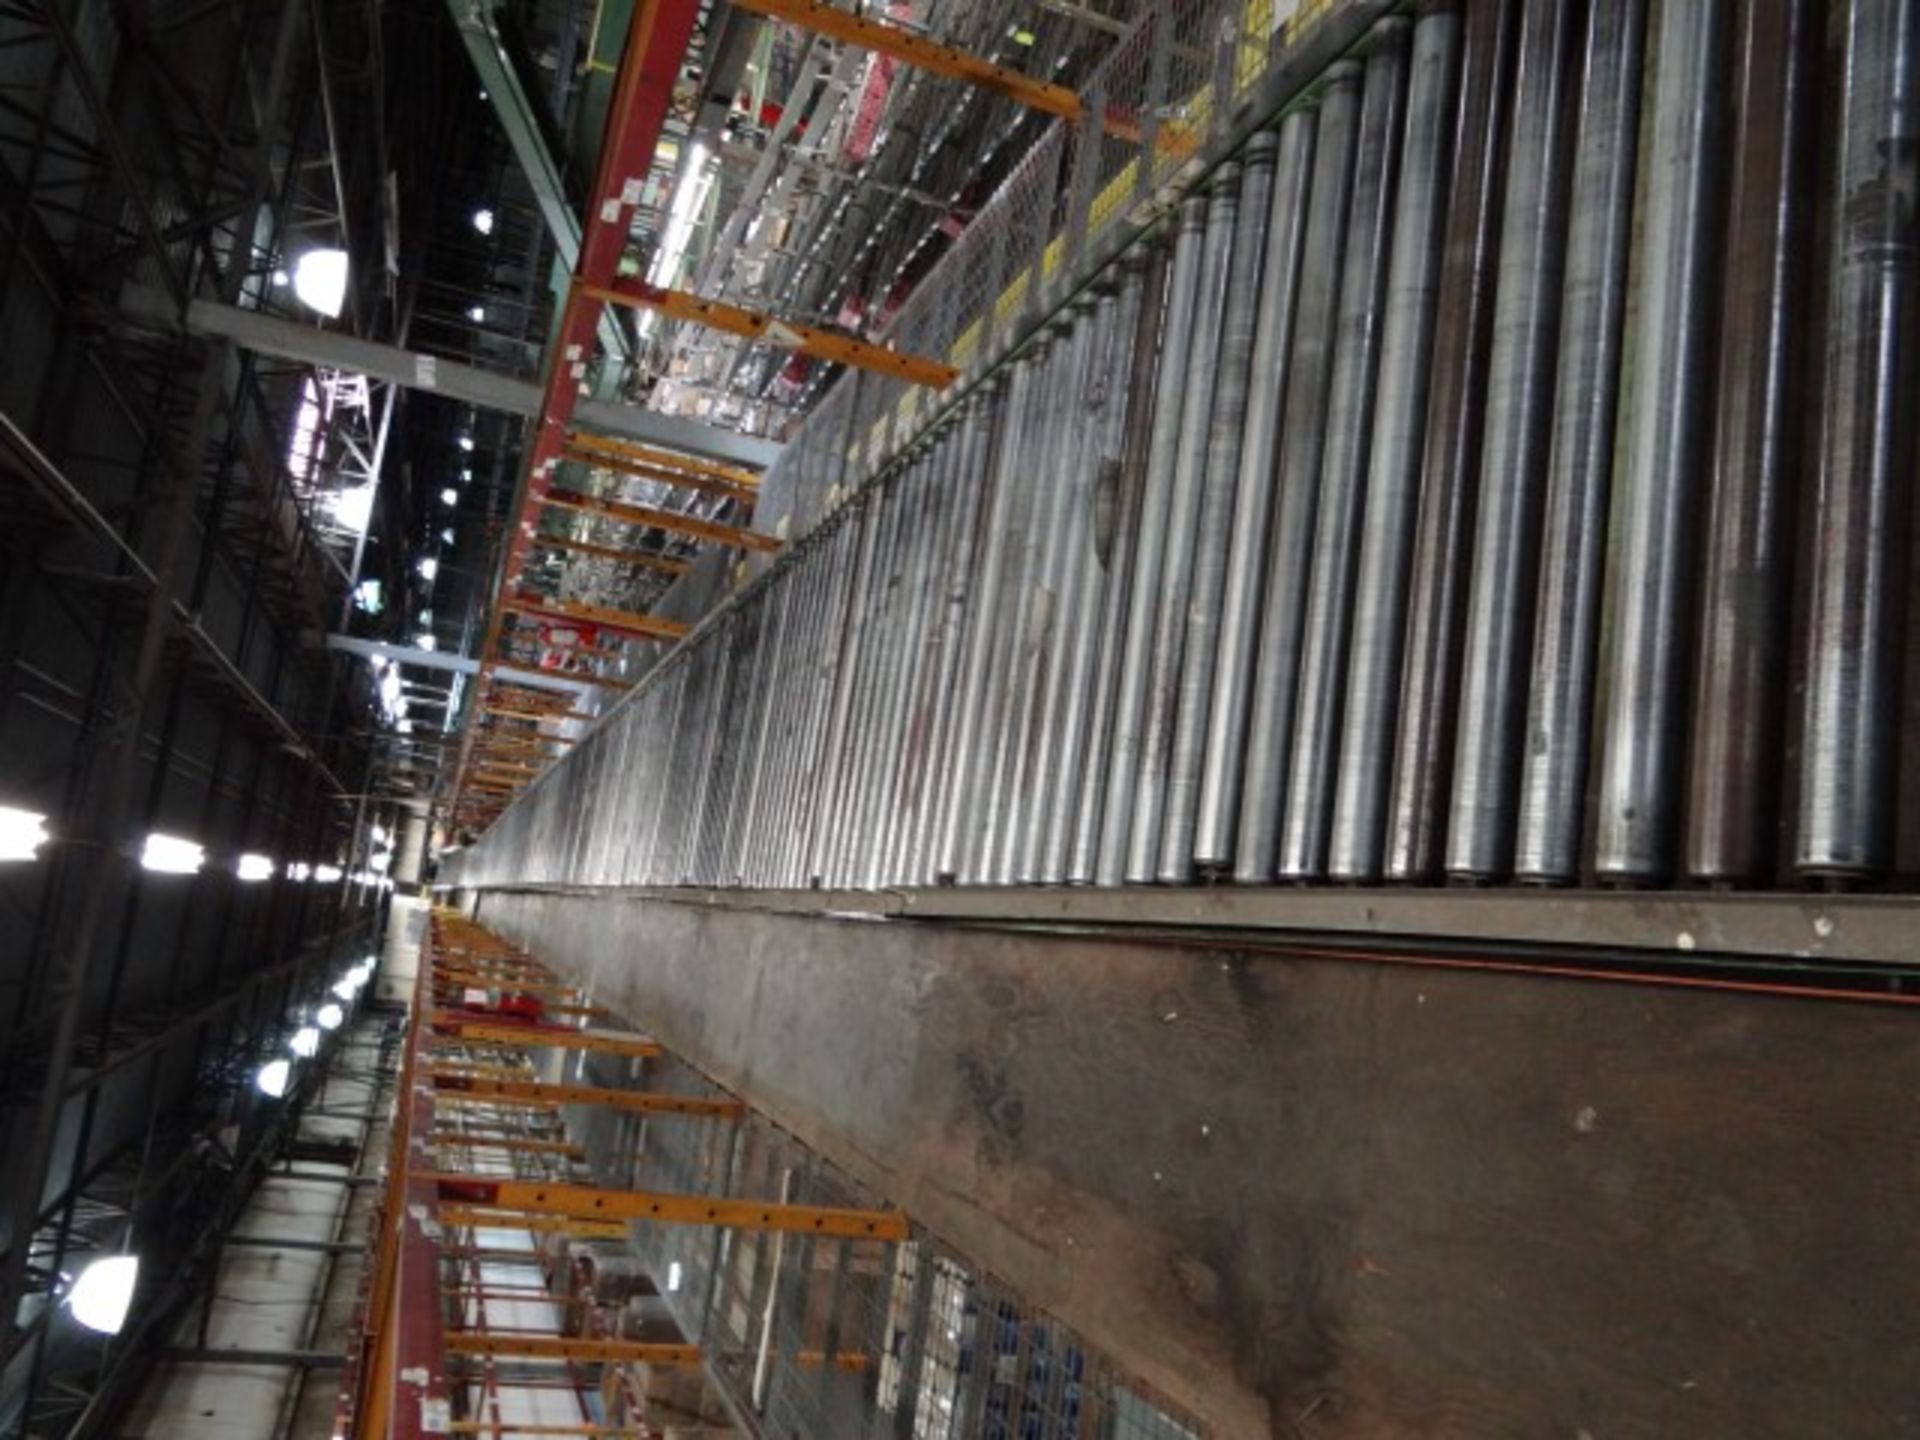 Line 5: Grocery Up Back Consisting of Approximately 200' of Roller, 270' of Roller, 12' Belt Incline - Image 6 of 10